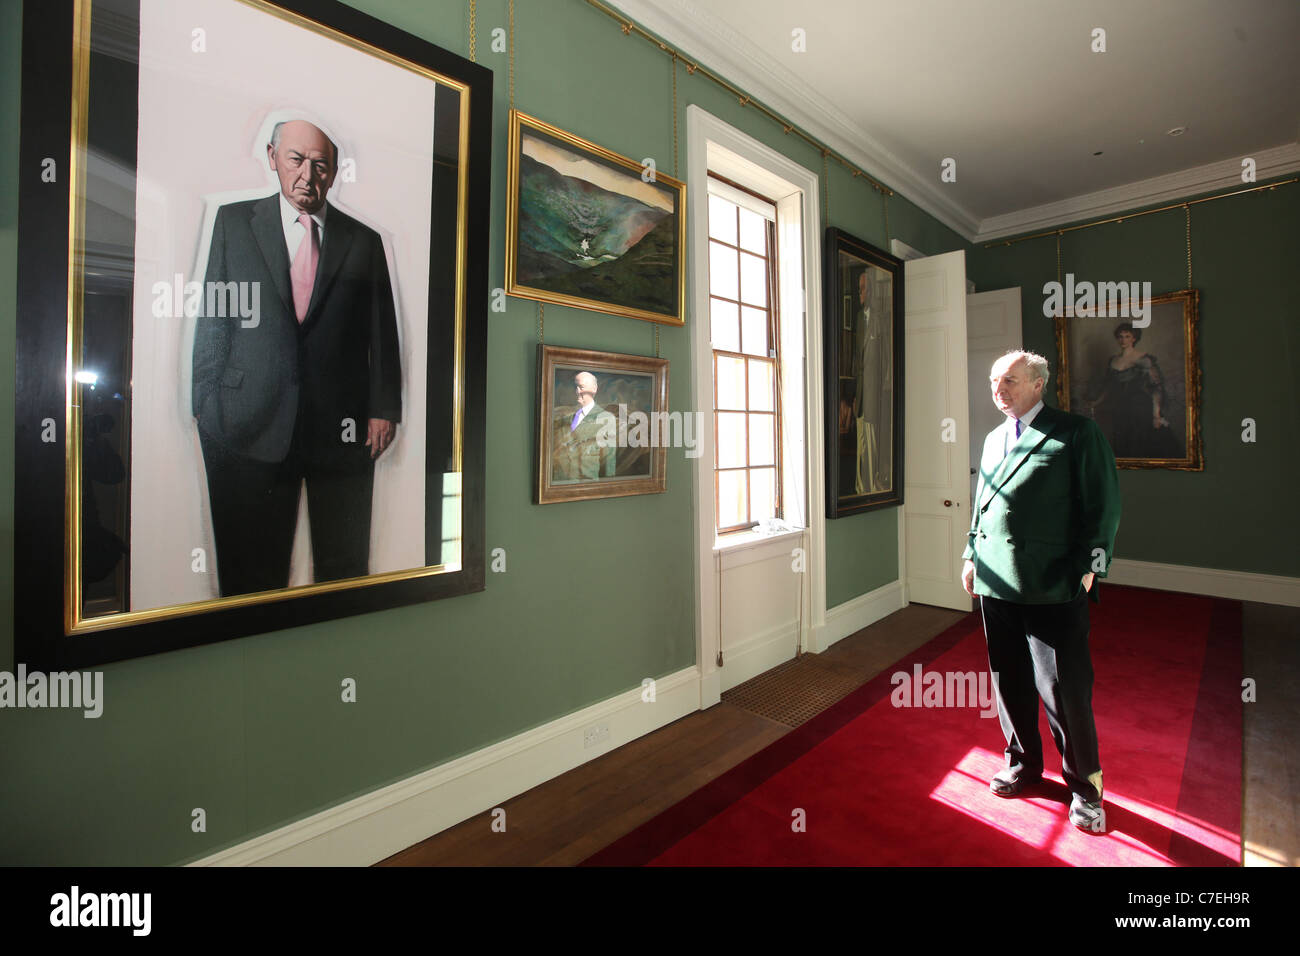 Chatsworth House Pictured is The Duke of Devonshire looking at a portrait of himself Stock Photo